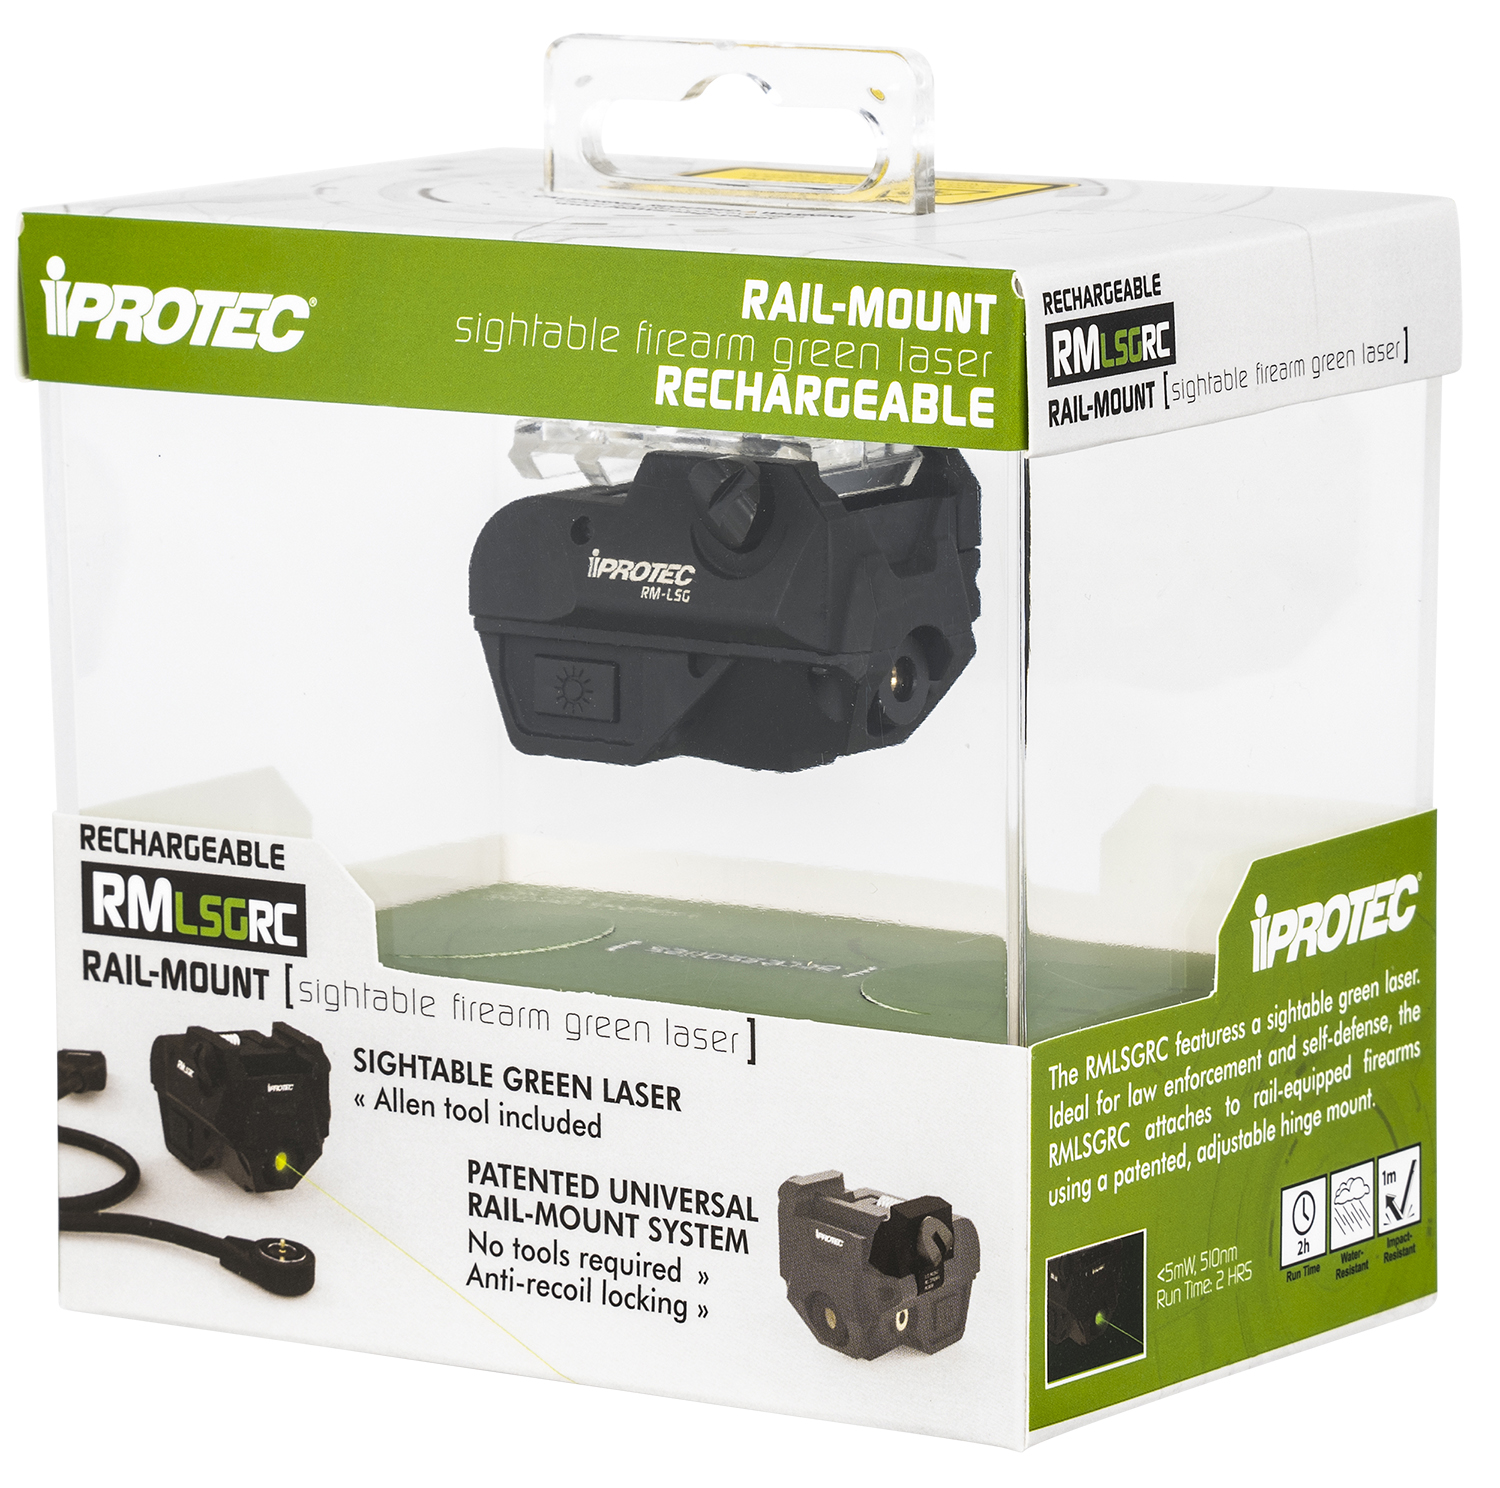 iProtec IPRSPS0001 RMLSG RC Rechargeable 5mW Green Laser with 510 nm Wavelength & Black Finish  for Rail-Equipped Long Guns, Handgun